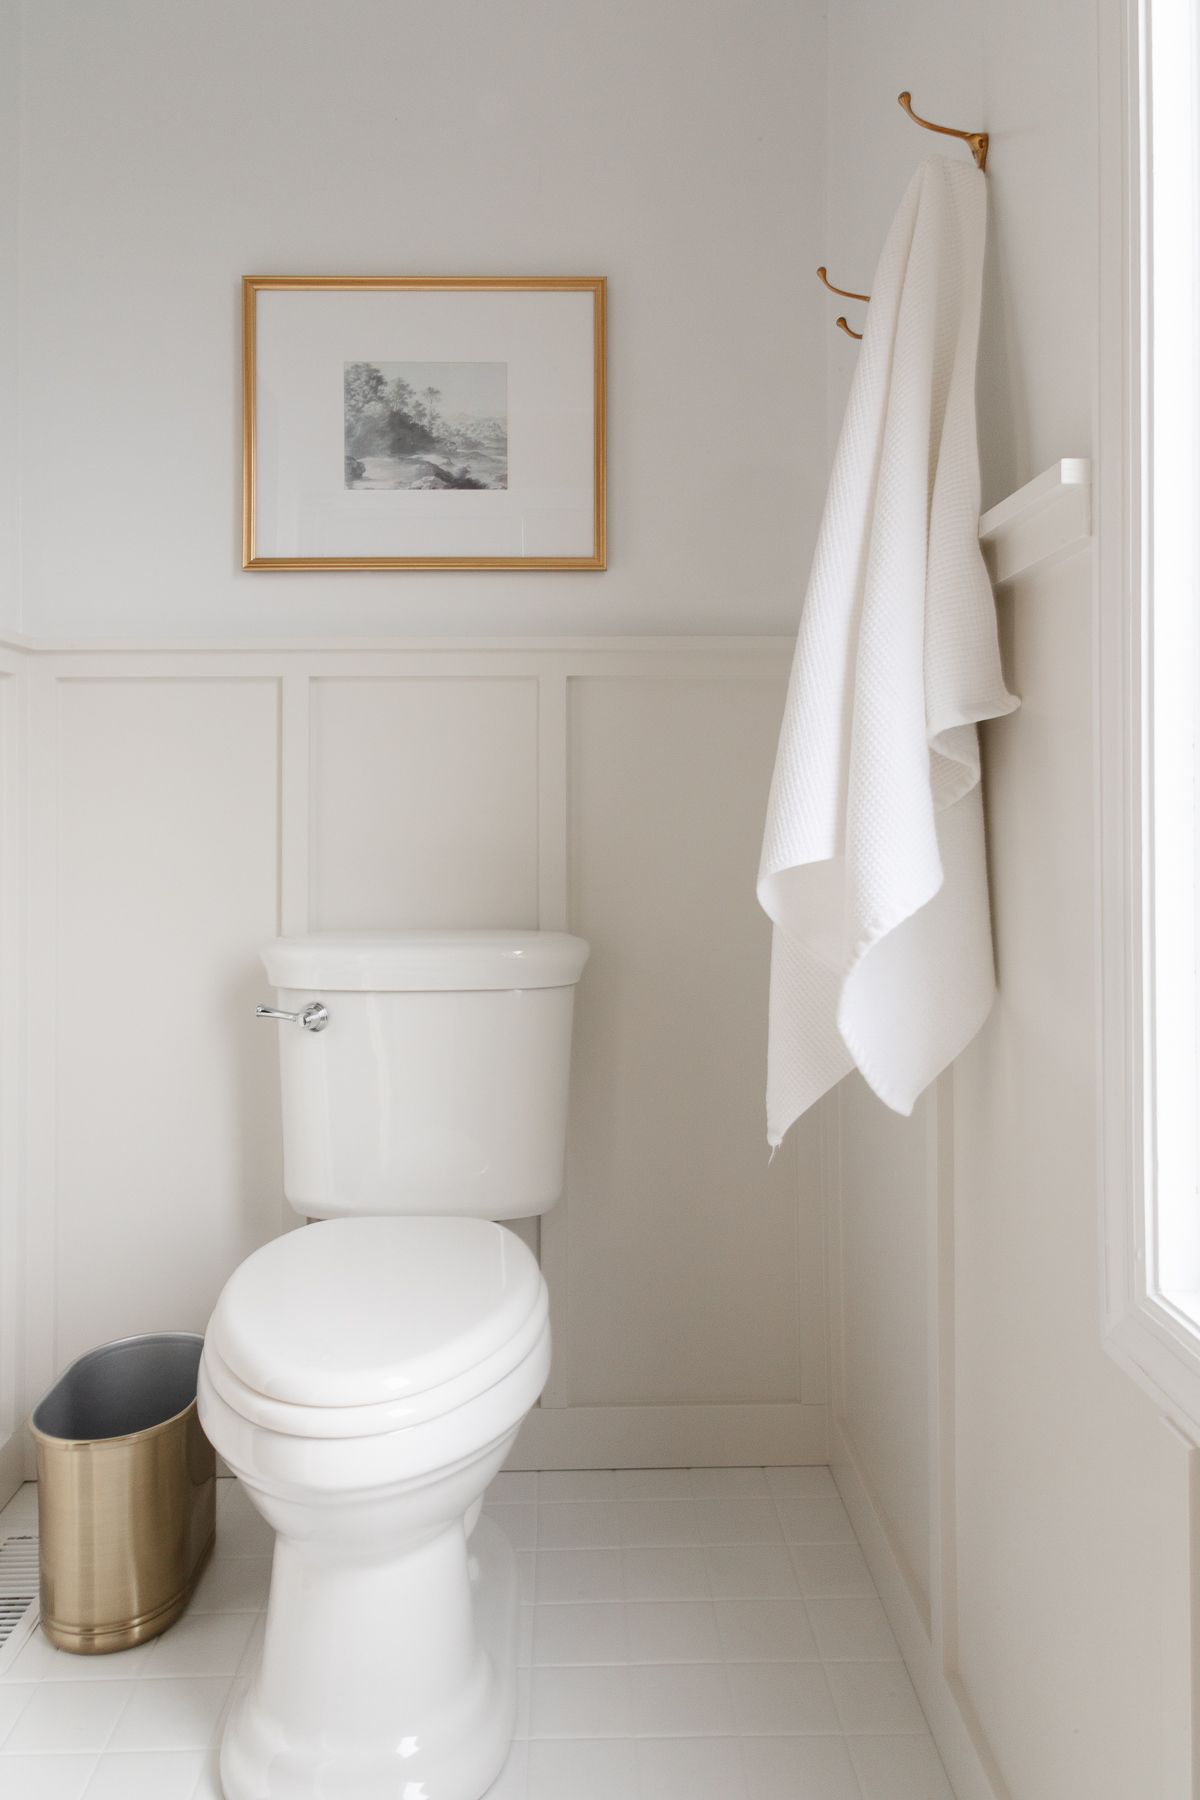 A bathroom with light gray board and batten